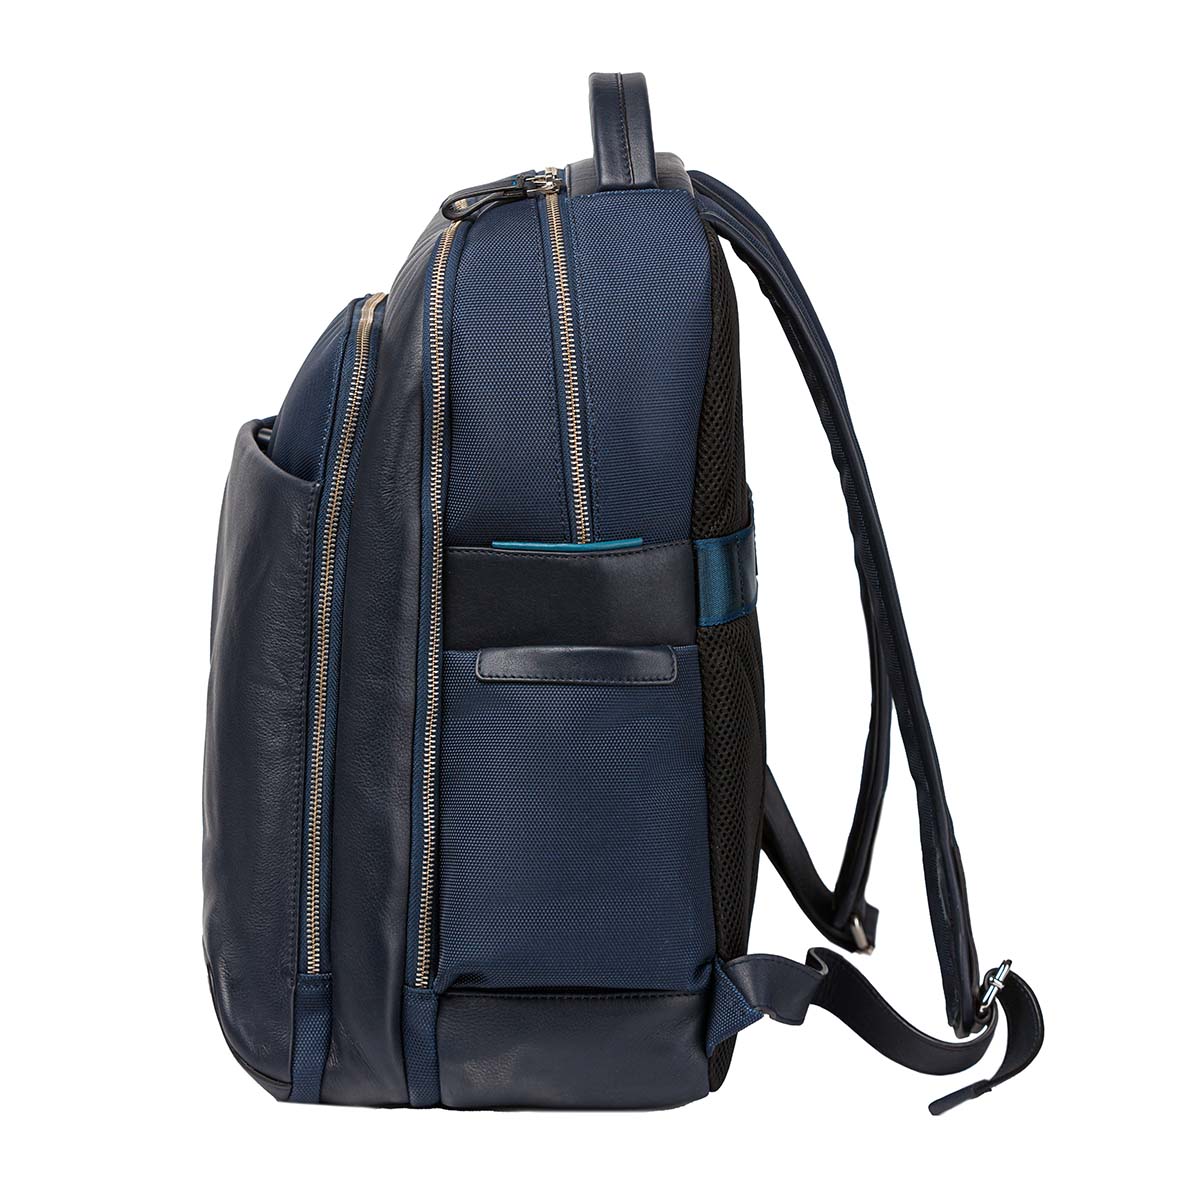 BACKPACK- LEATHER, FABRIC-BLUE COLOR- ITALY – Arma Fabrics